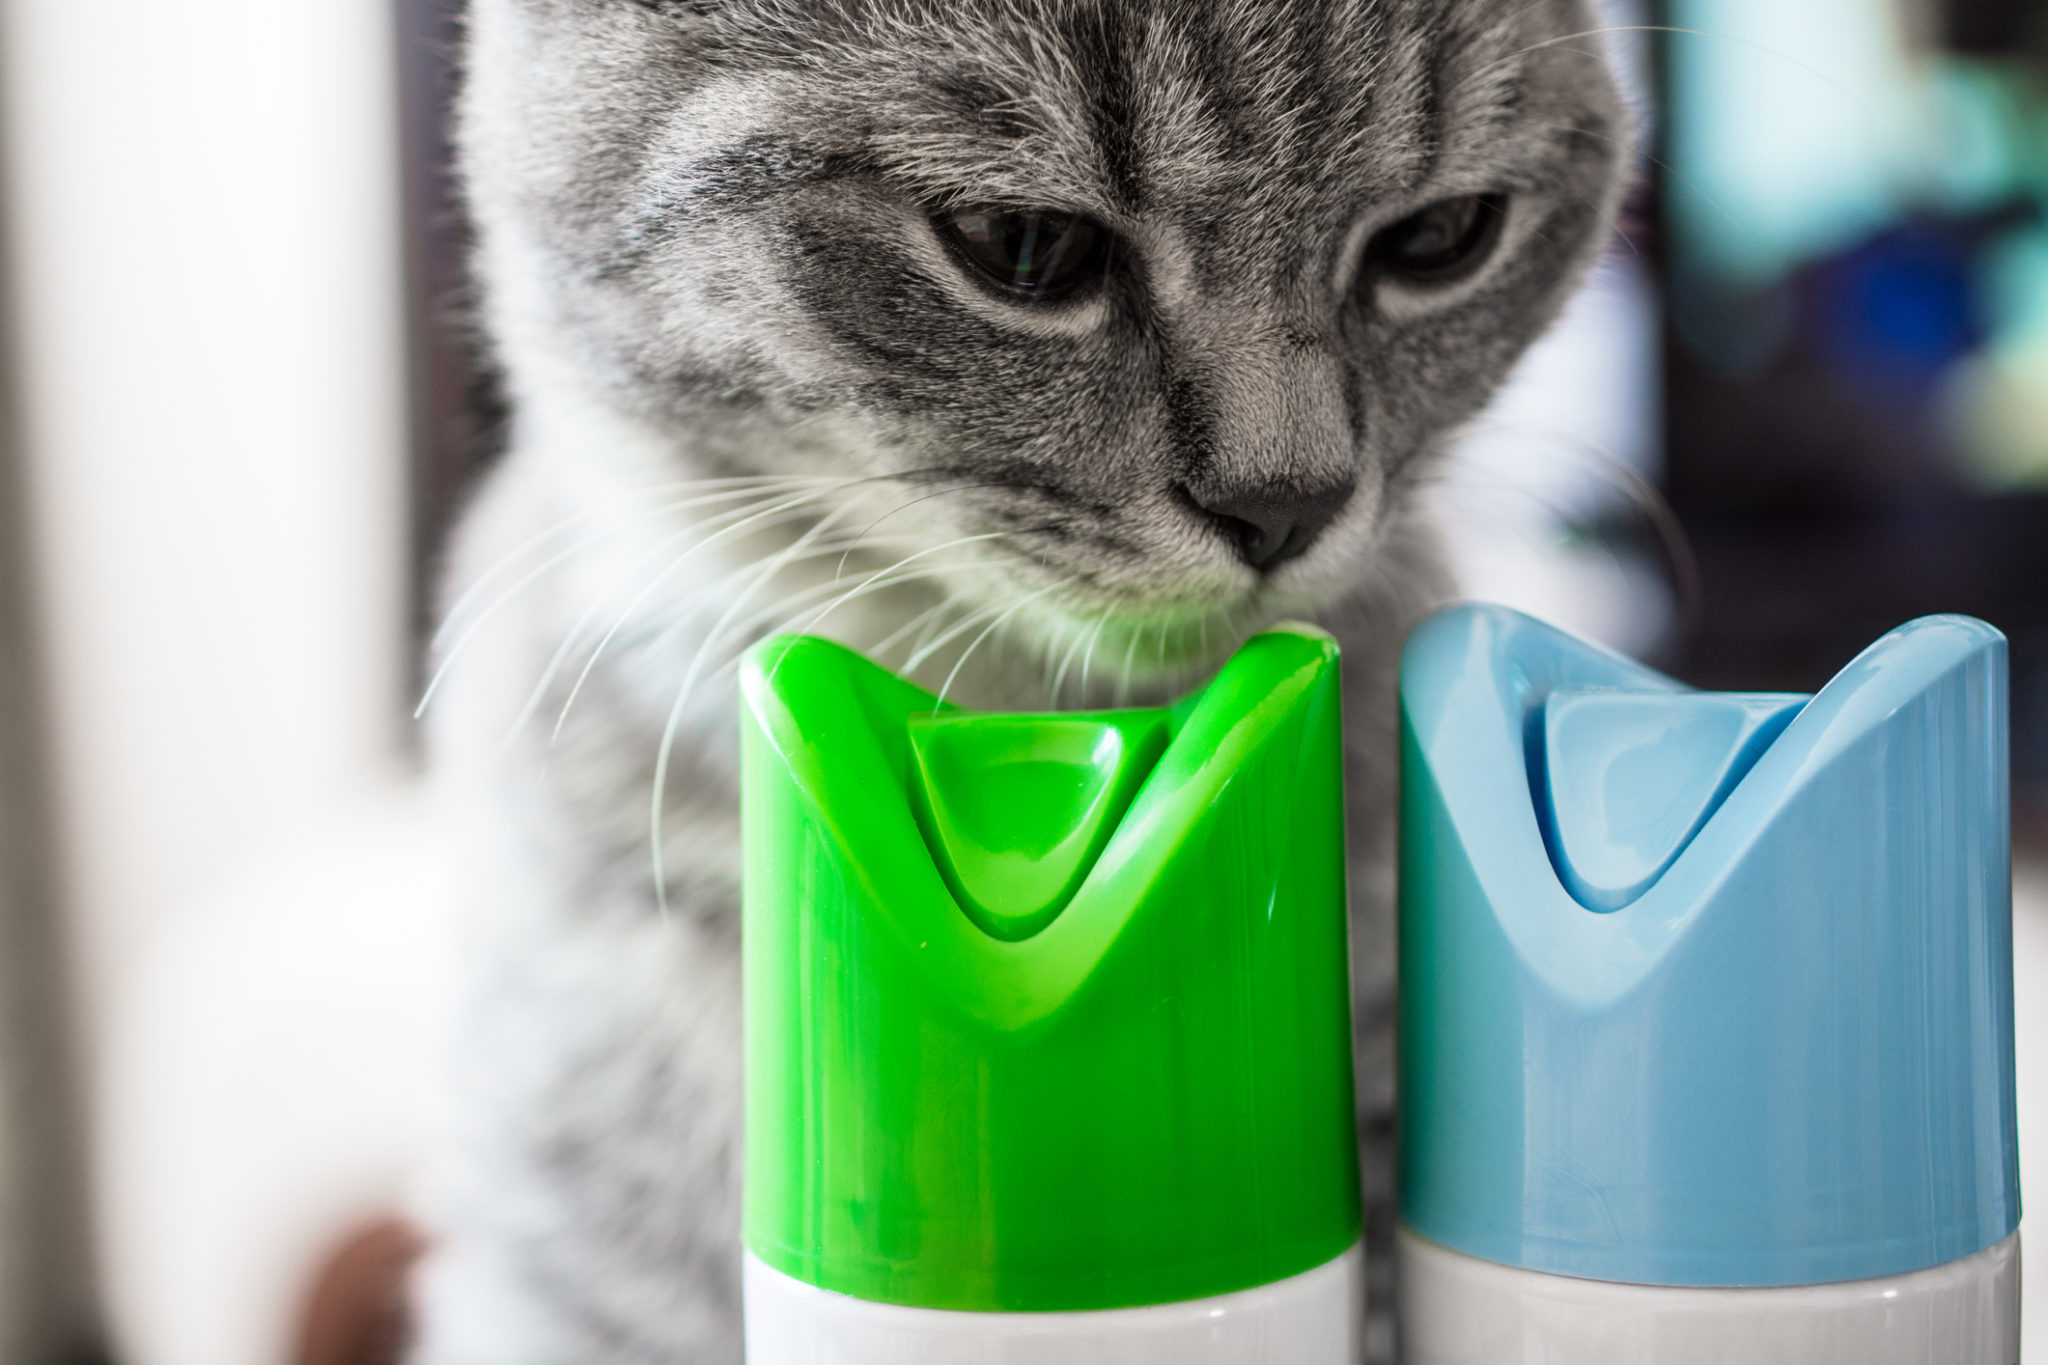 Cat is sniffing cylinder of air freshener. Two cylinders with blue and green caps.